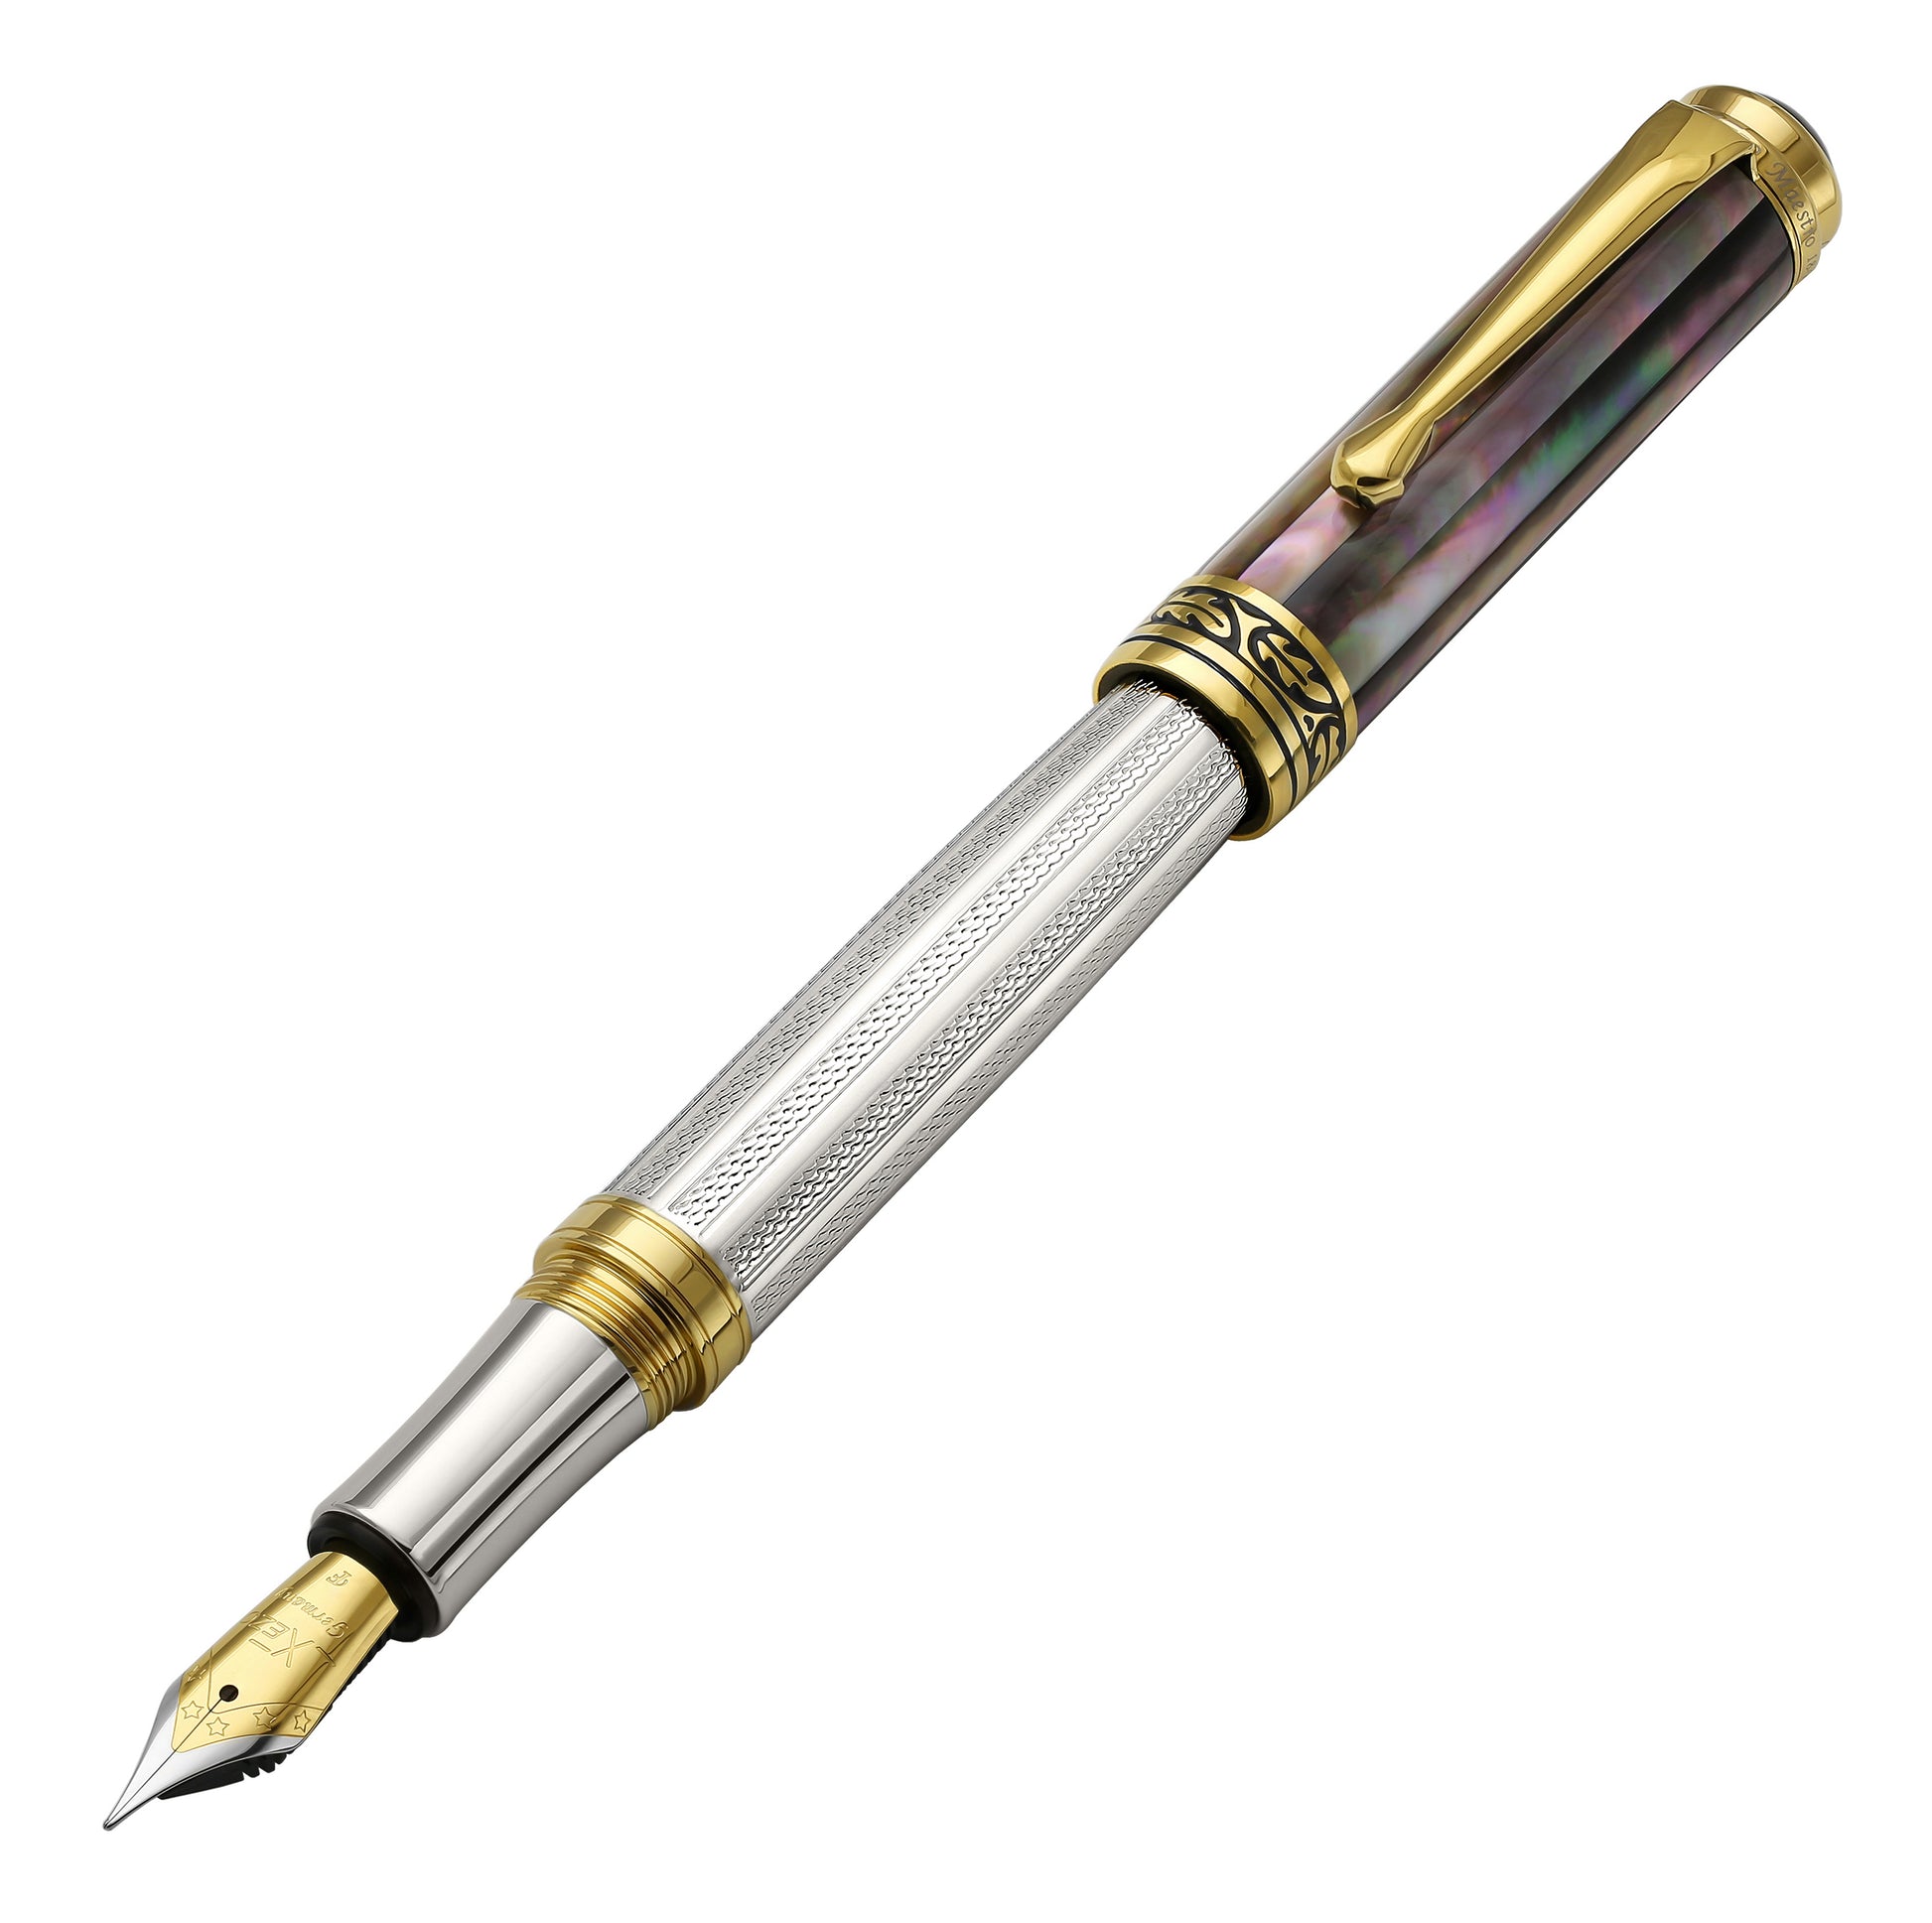 Xezo - Angled view of the front of the Maestro 925 BL MOP FG fountain pen